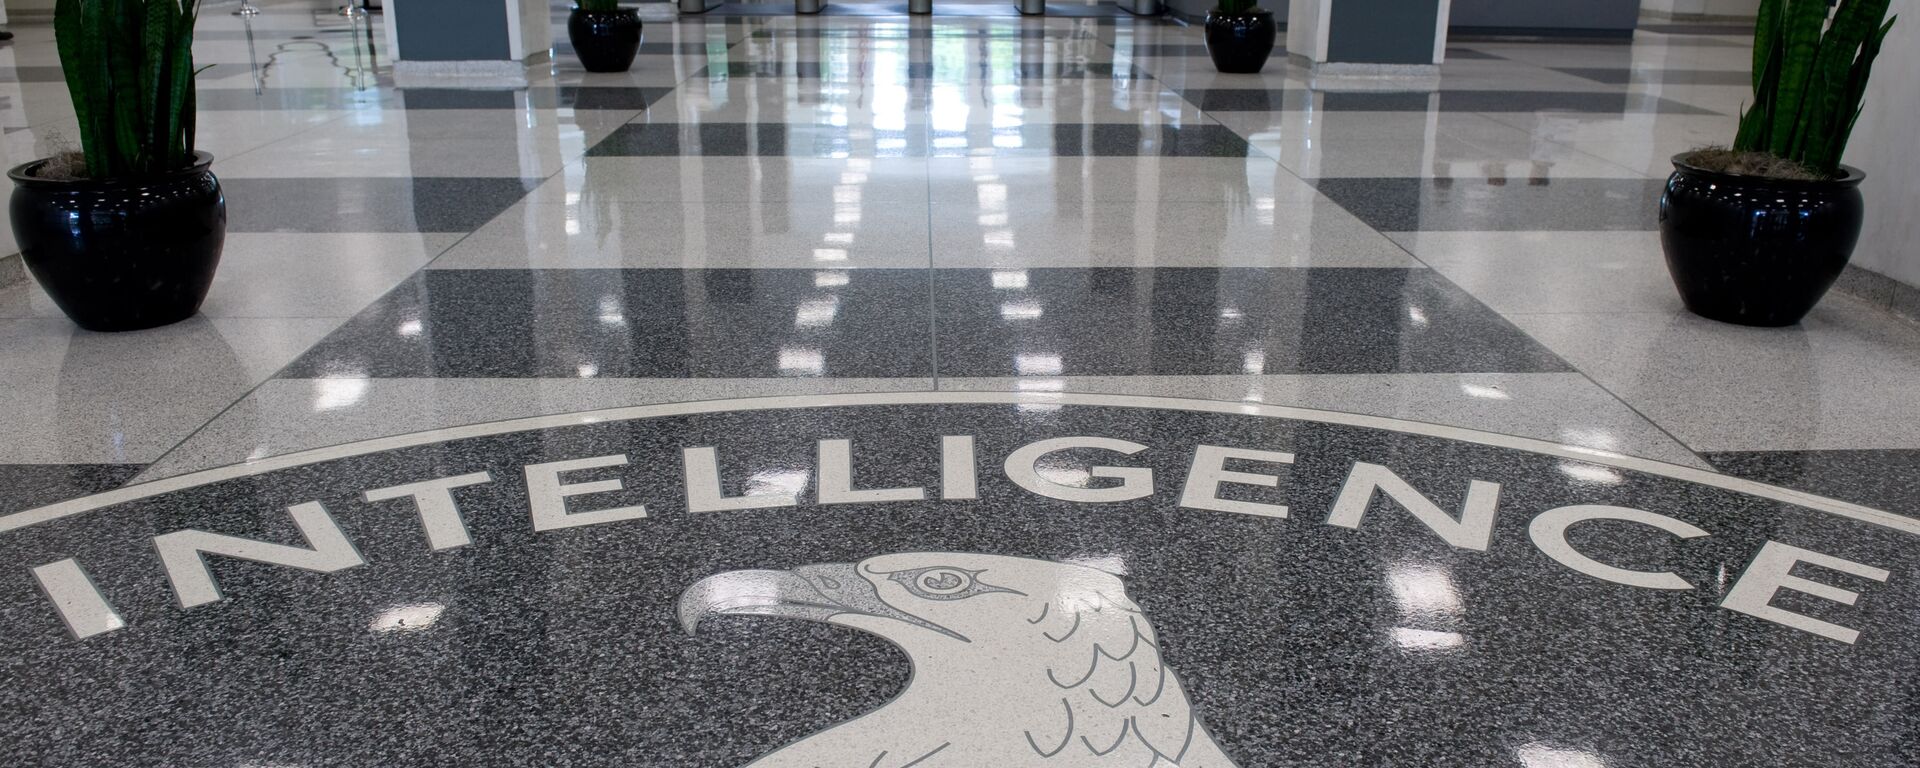 The Central Intelligence Agency (CIA) logo is displayed in the lobby of CIA Headquarters in Langley, Virginia - Sputnik International, 1920, 11.02.2022